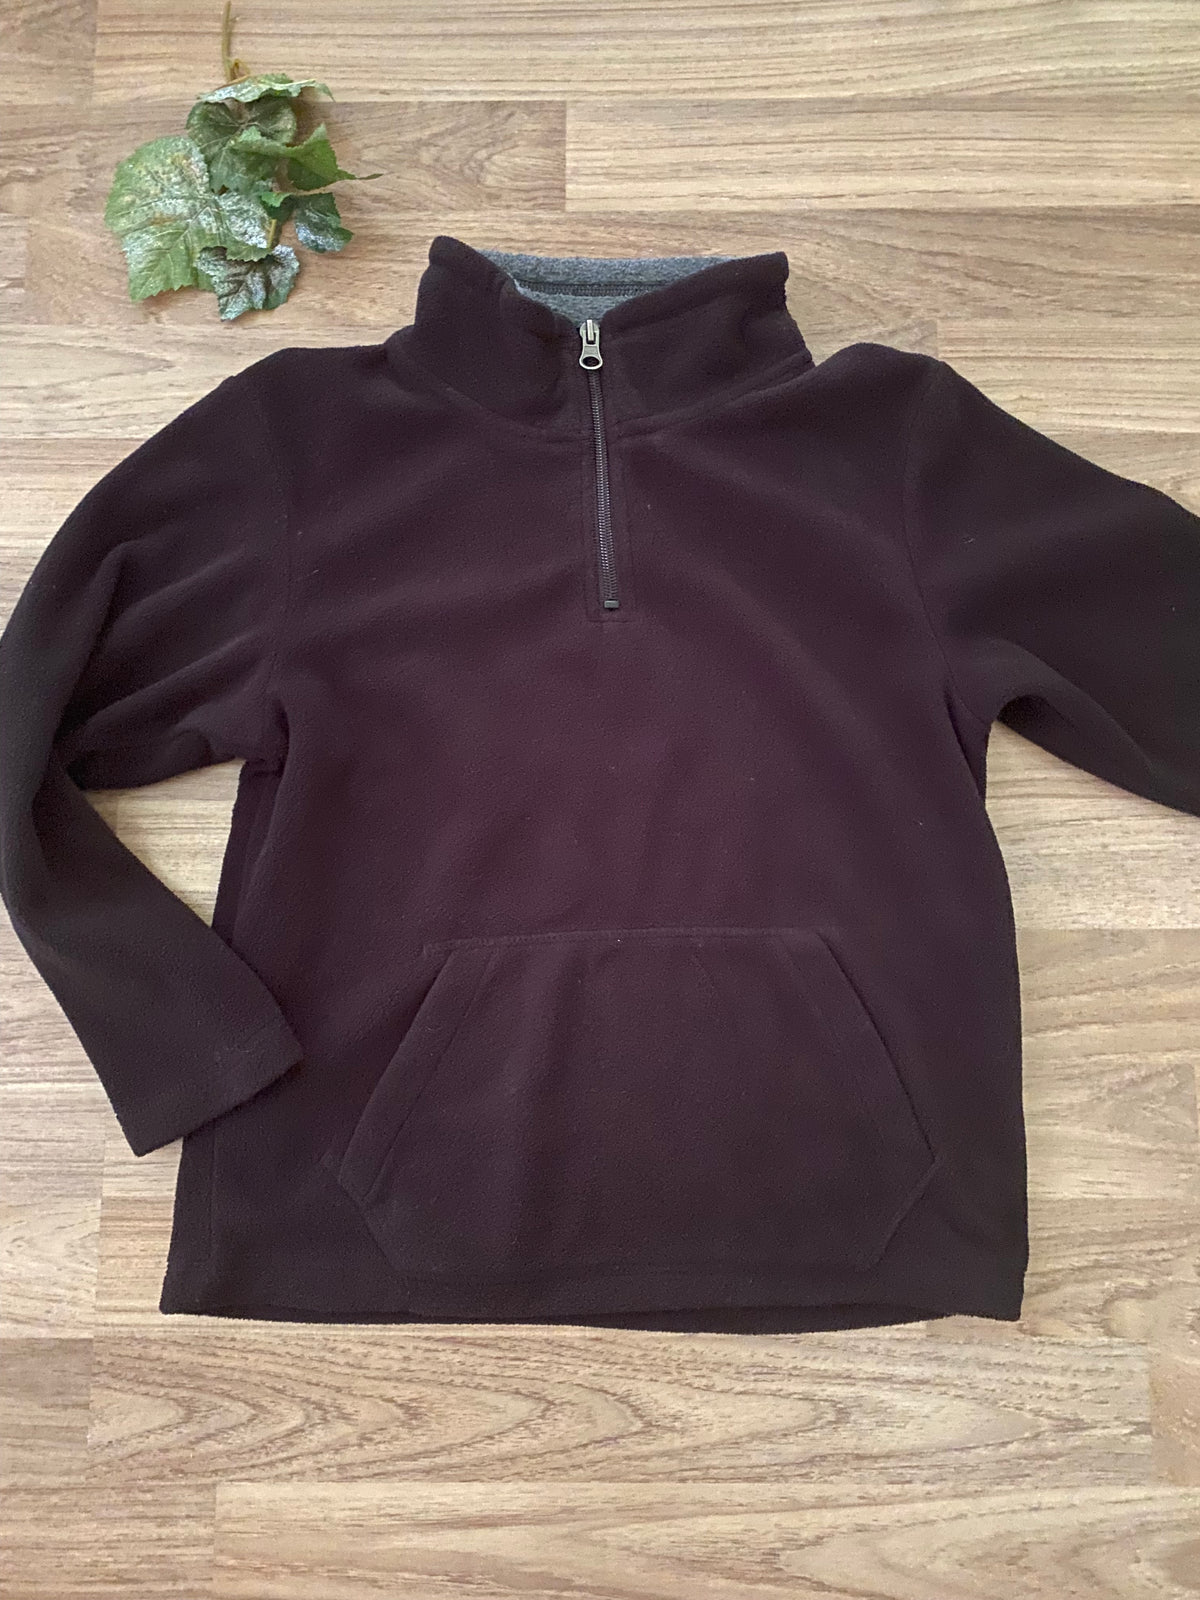 3/4 Zip Up Sweater (Boys Size 5-6)